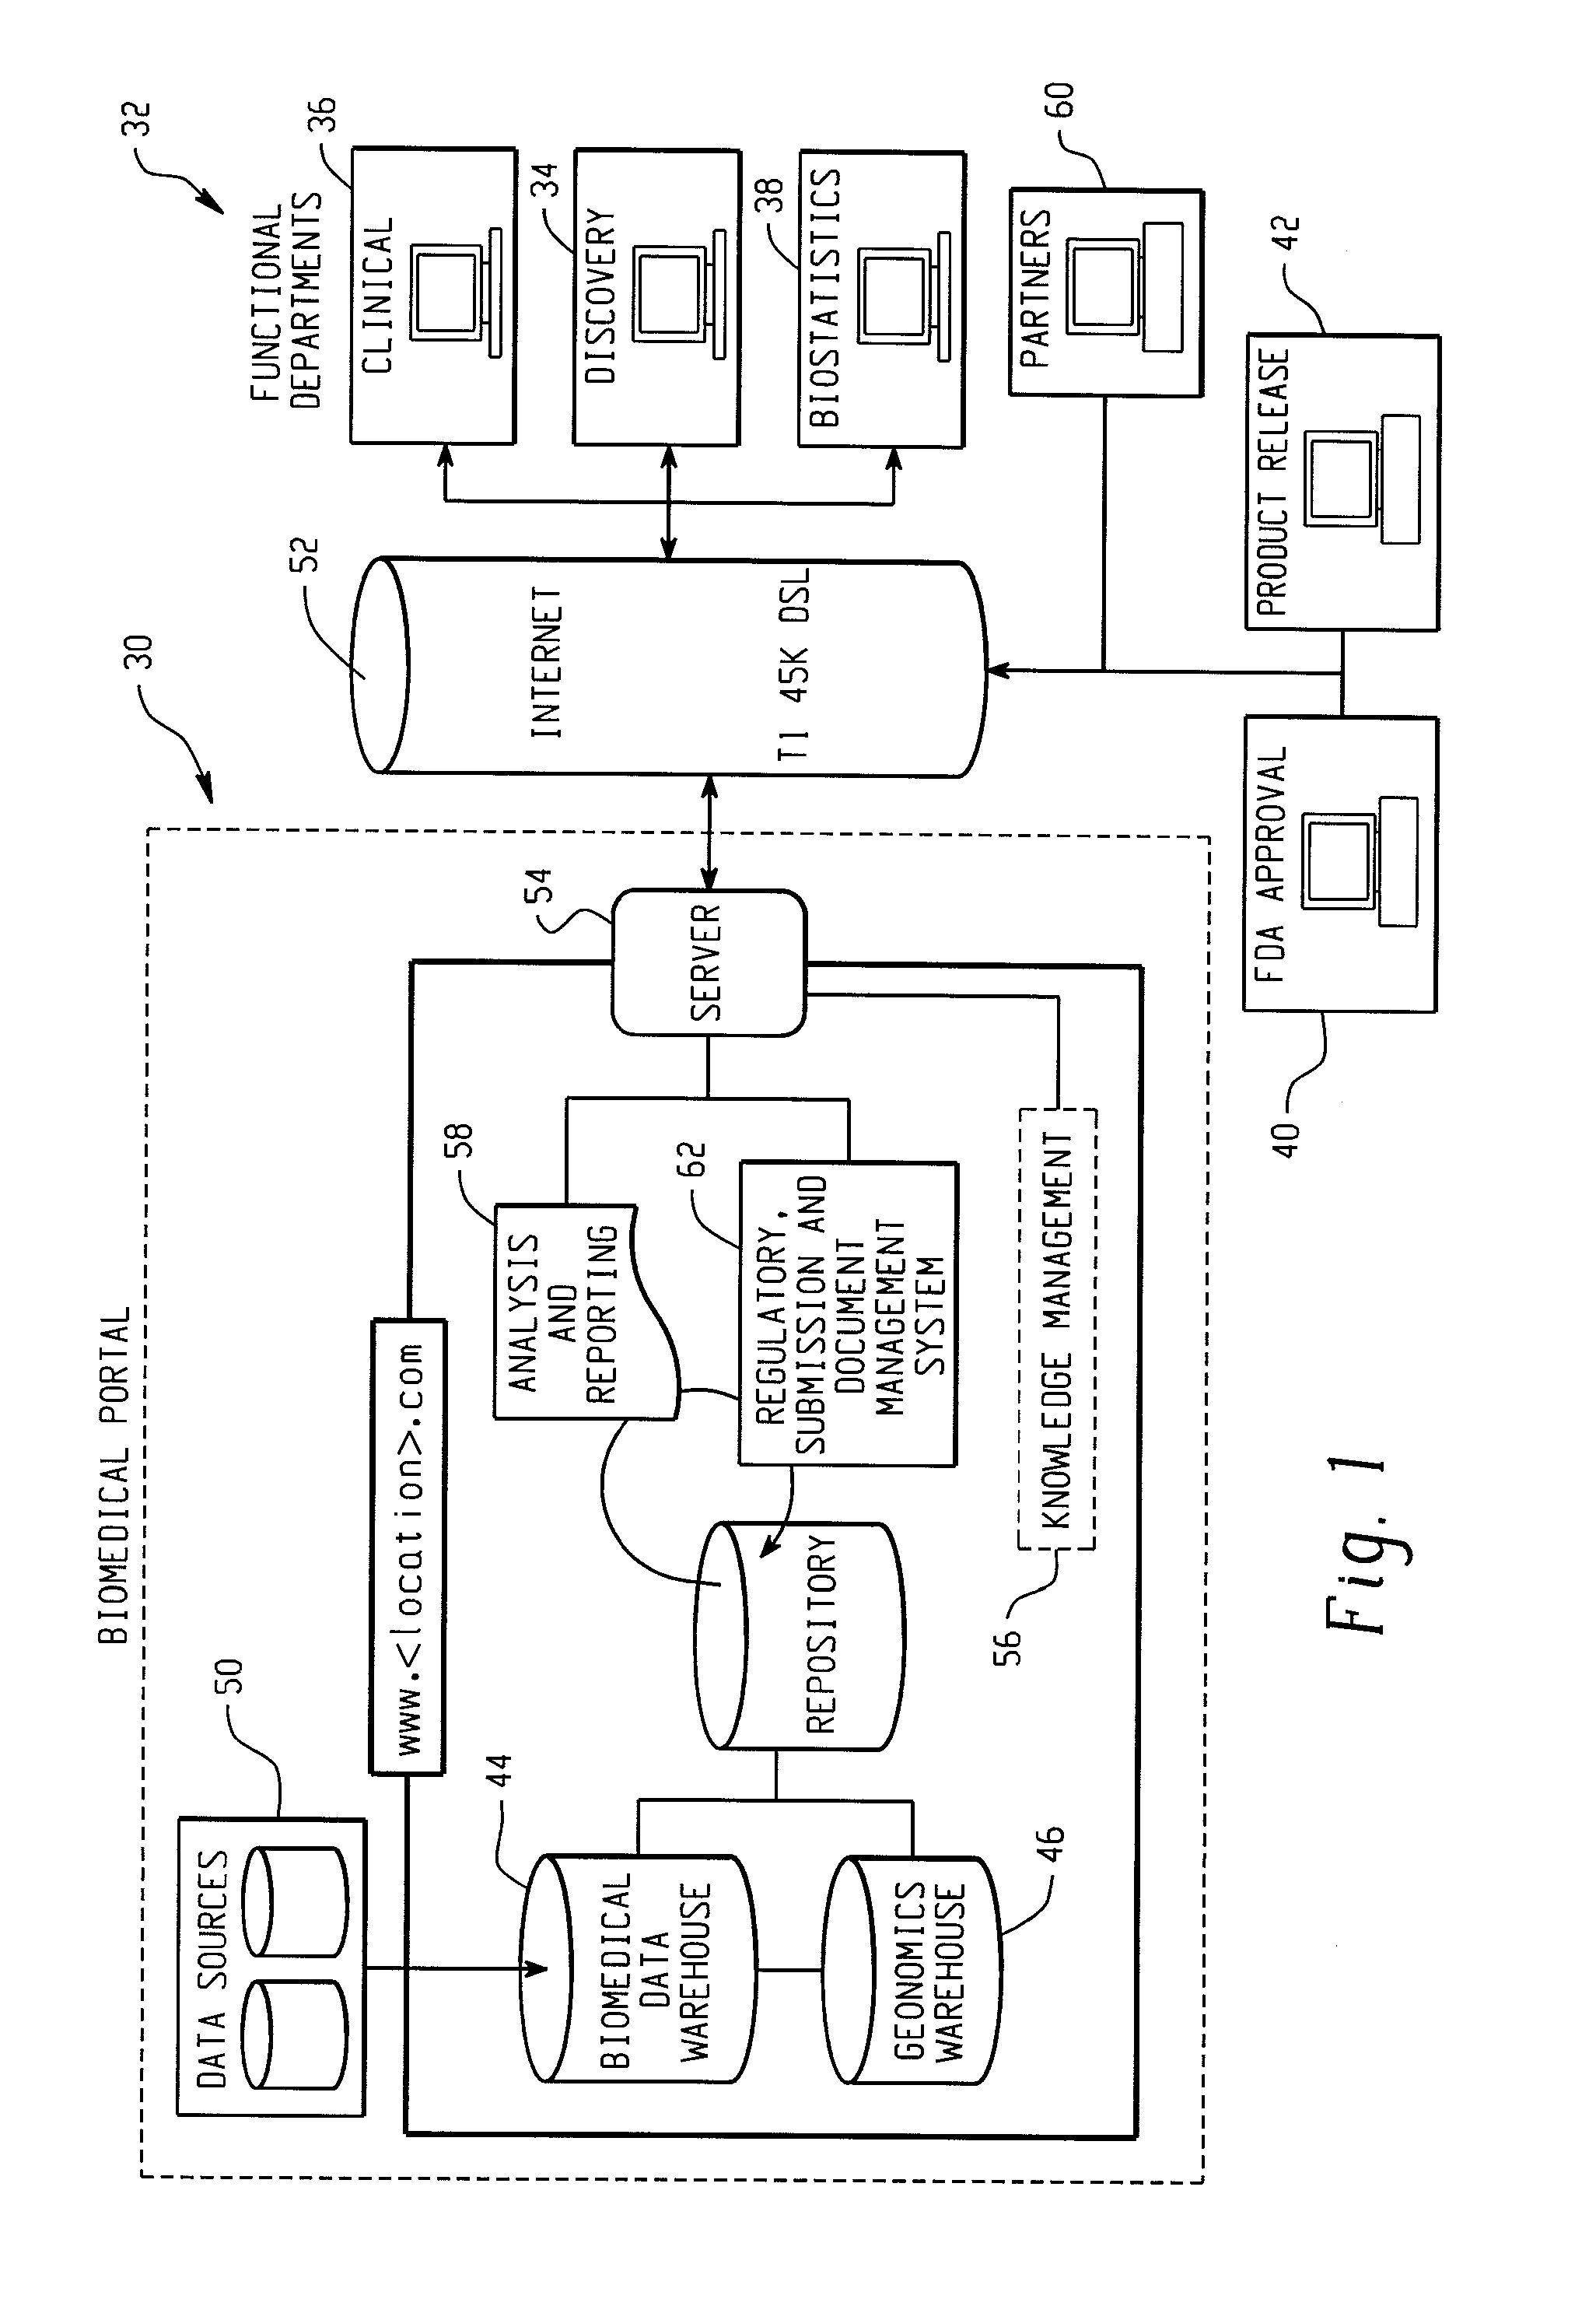 Integrated Biomedical Information Portal System And Method